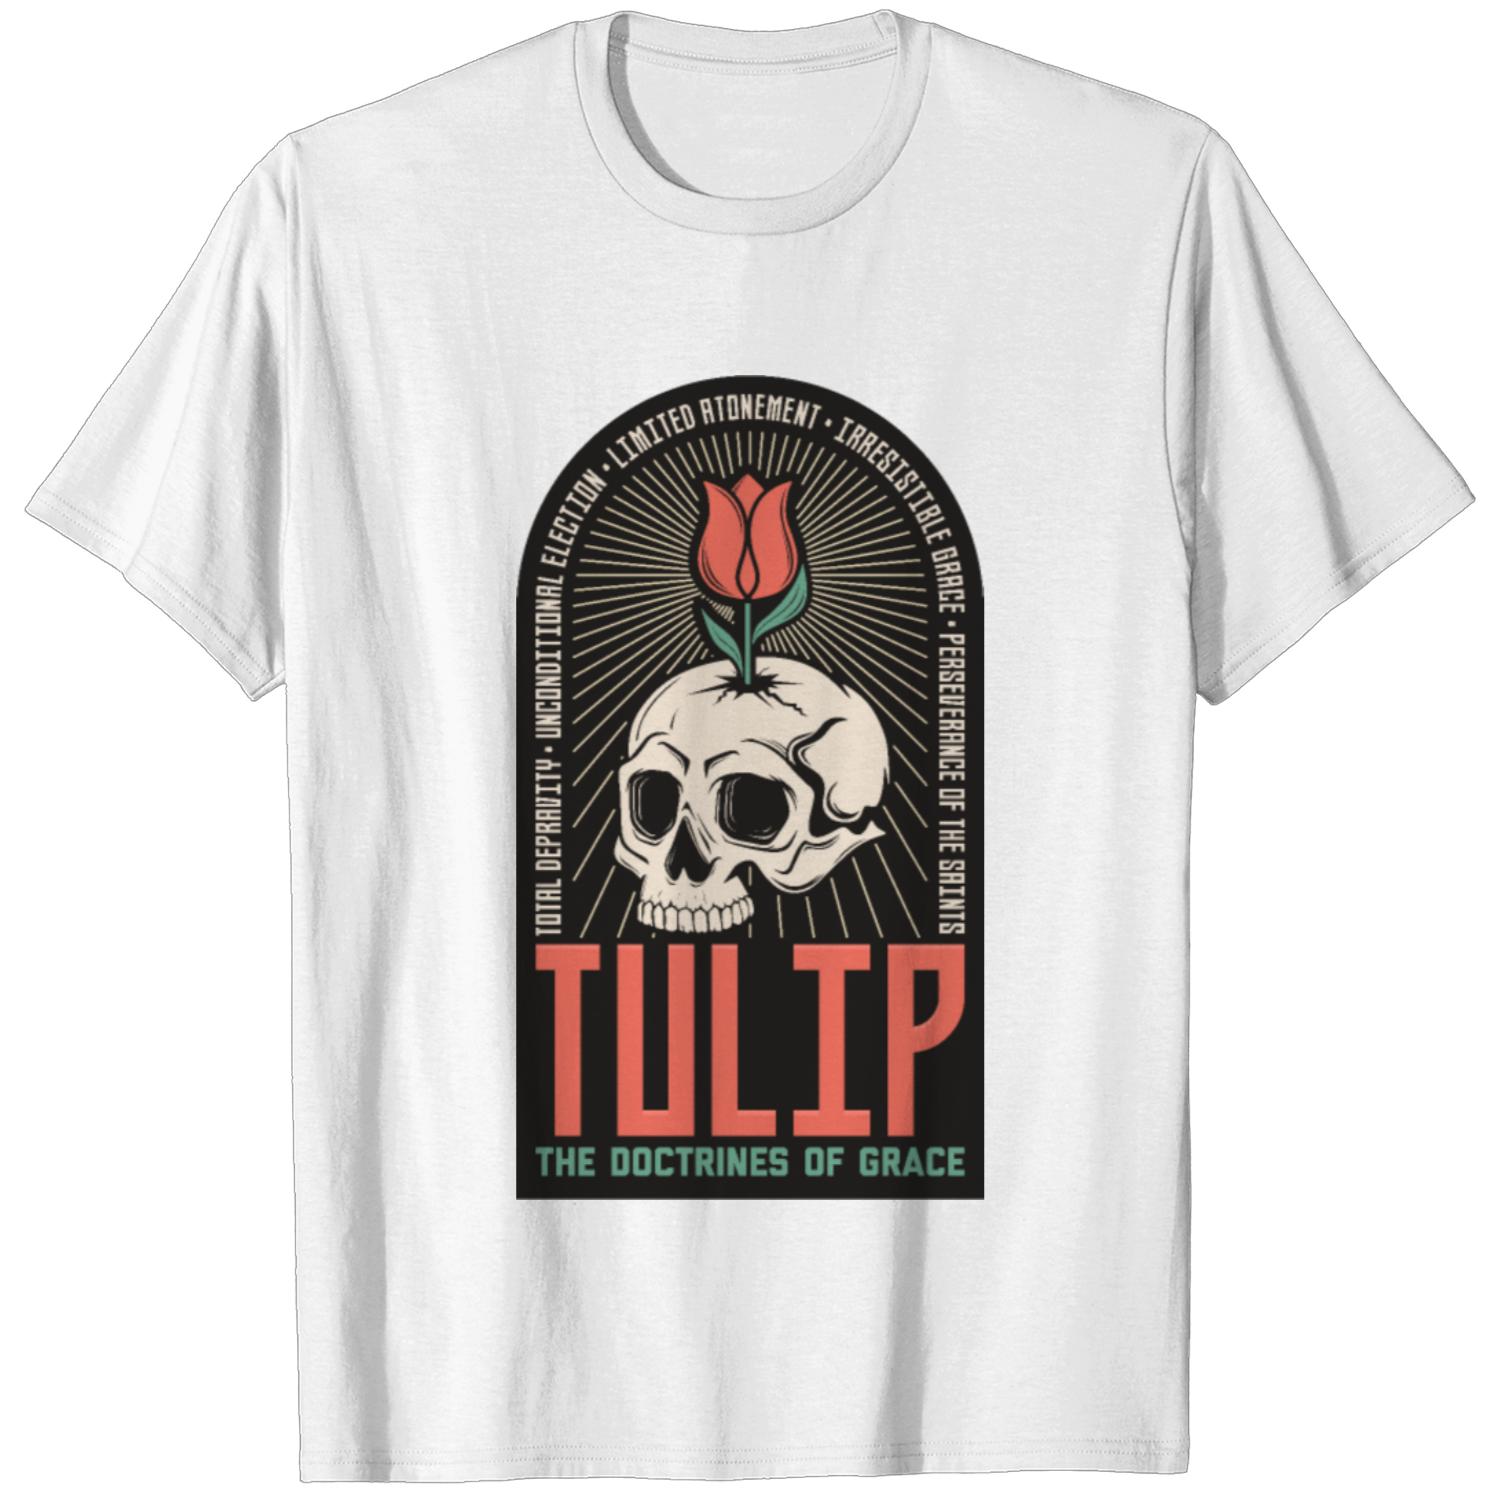 TULIP - The doctrines of grace T-shirt